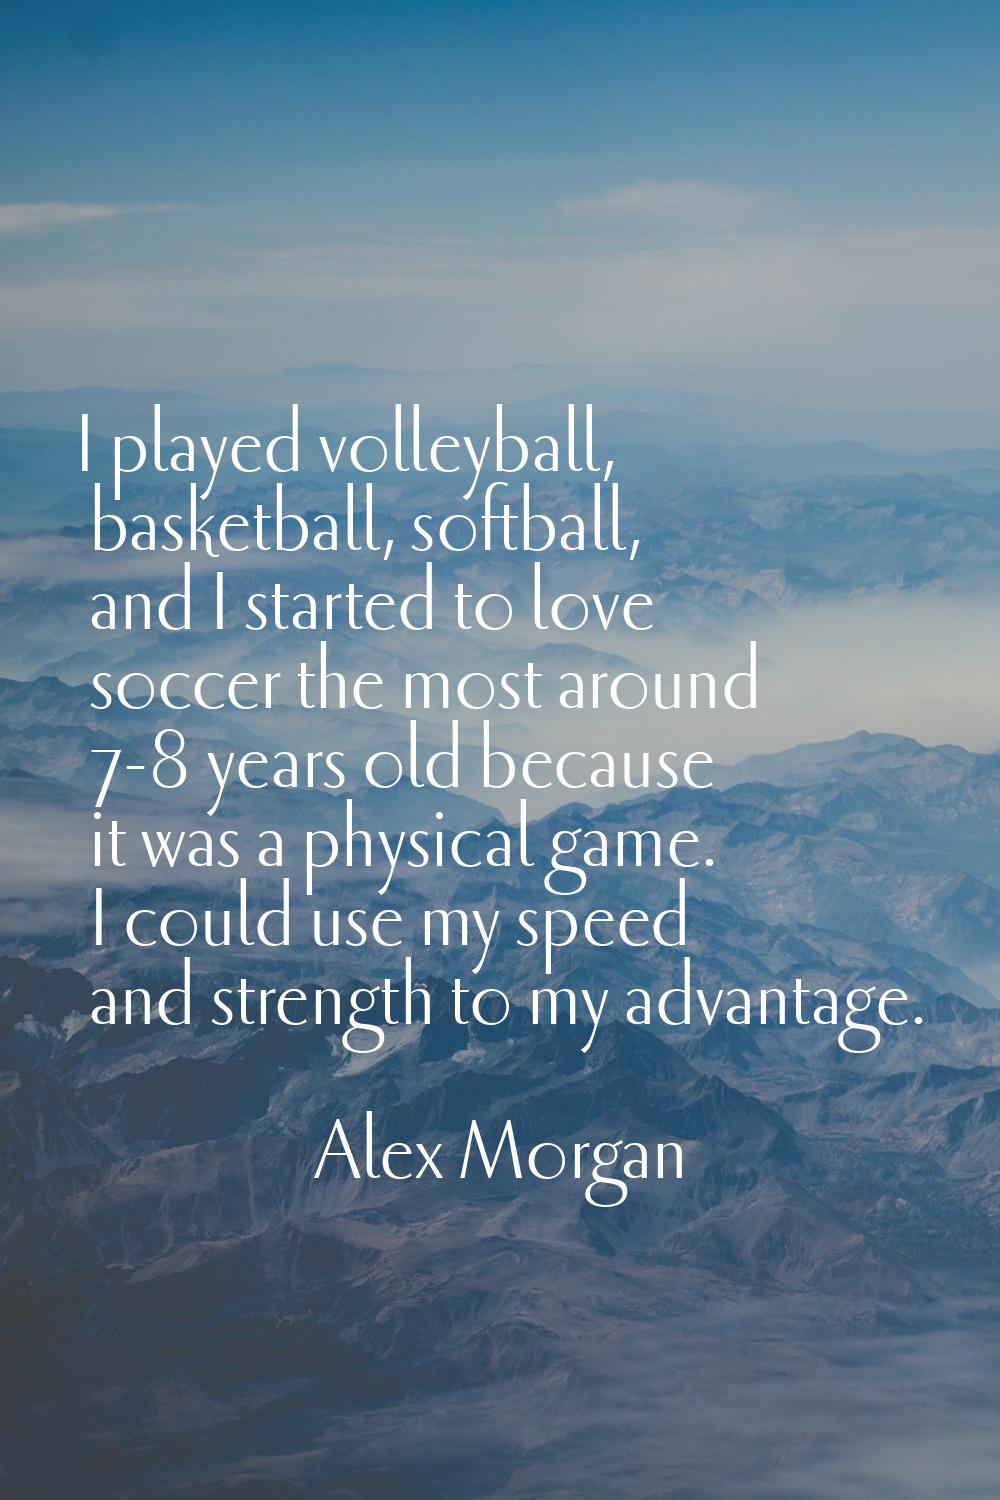 I played volleyball, basketball, softball, and I started to love soccer the most around 7-8 years o